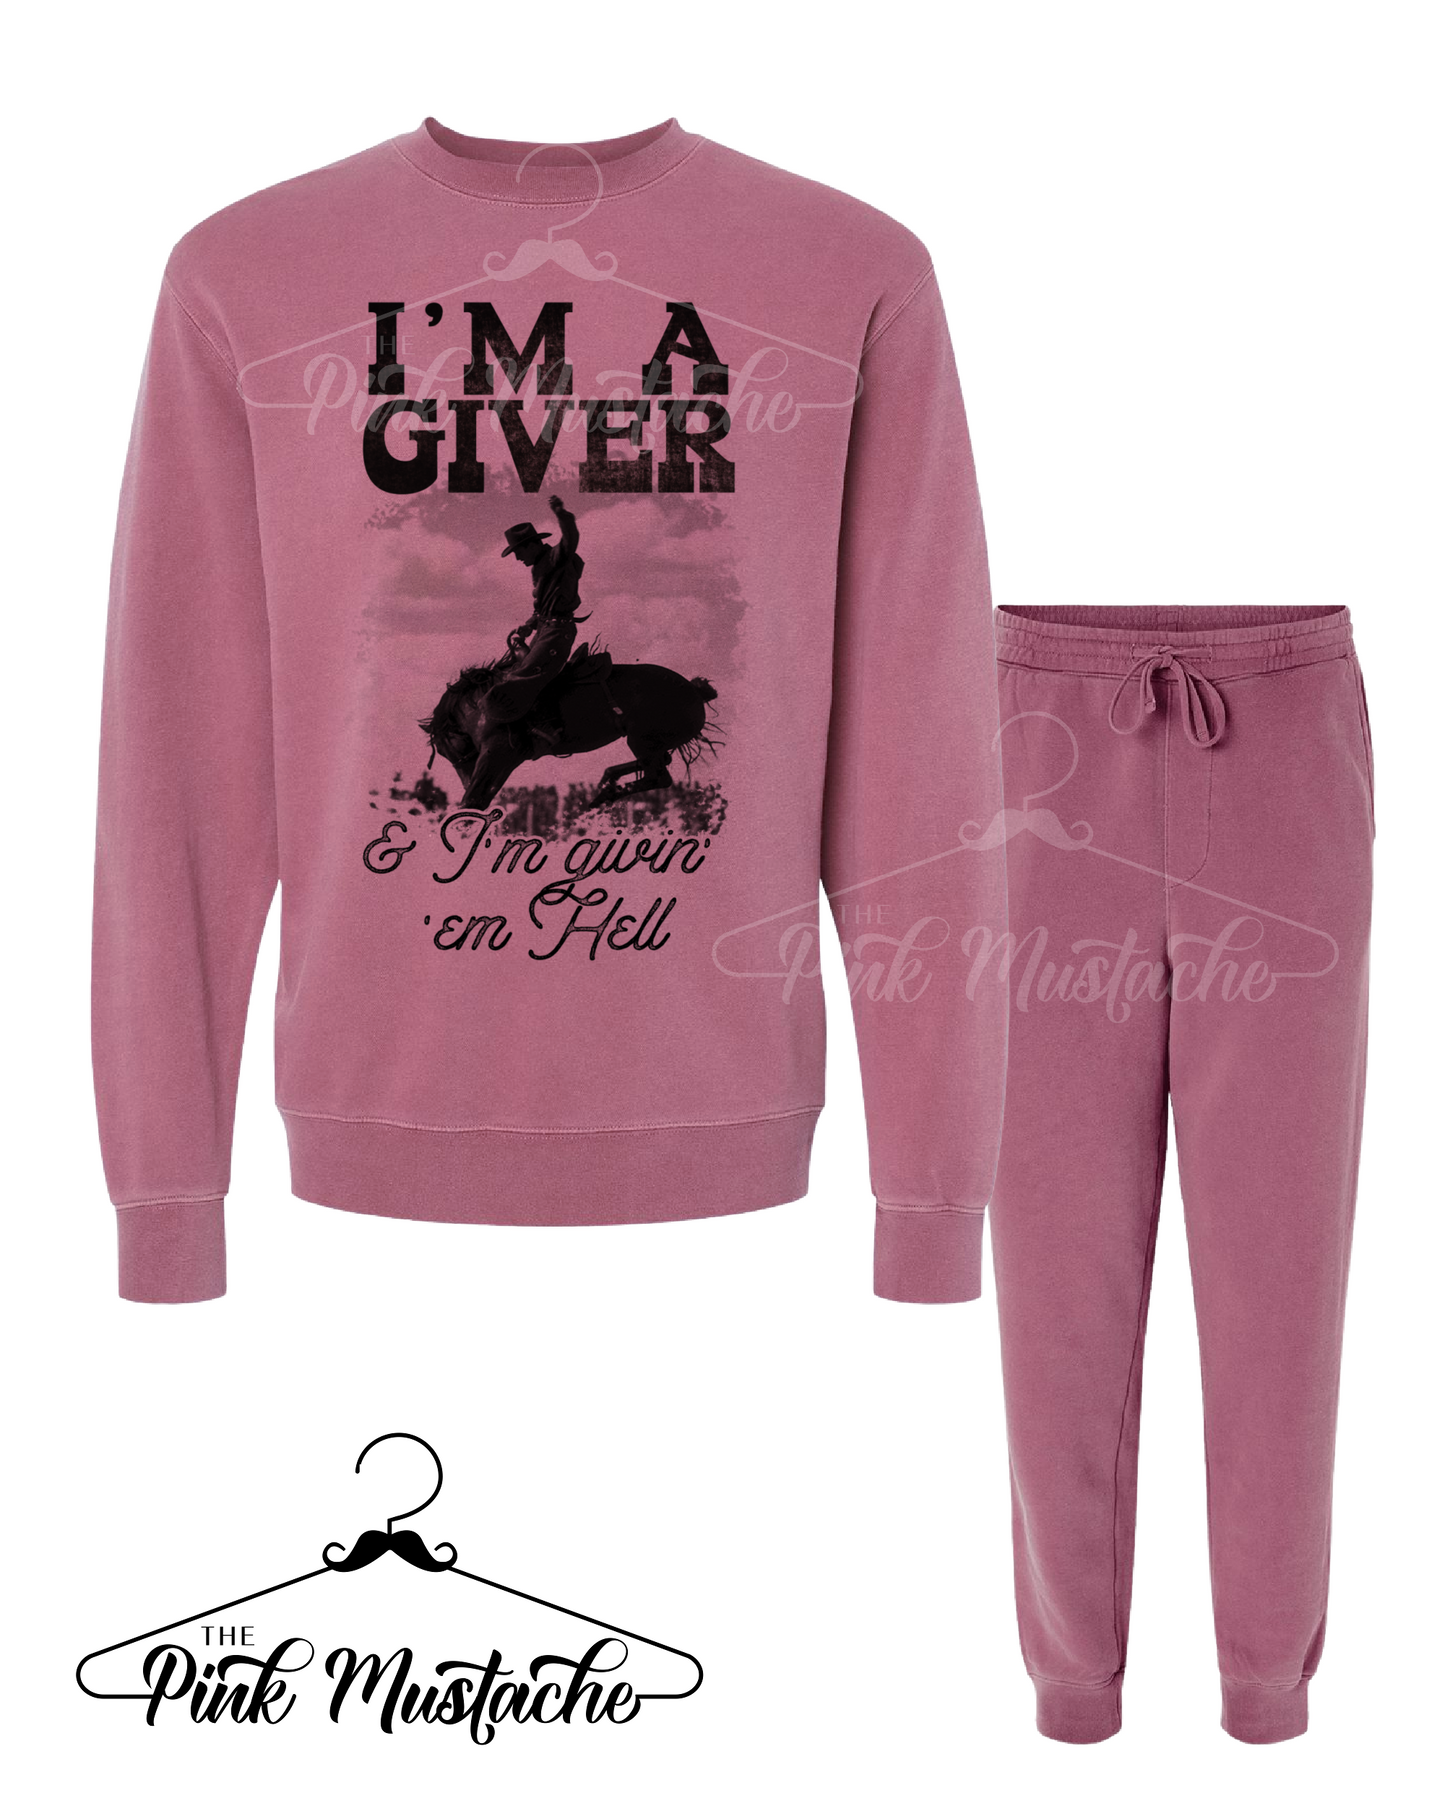 I'm A Giver and I'm Still Giving Them Hell Joggers/ Pigment Dyed Sweatshirt/ Set - Sold Separately